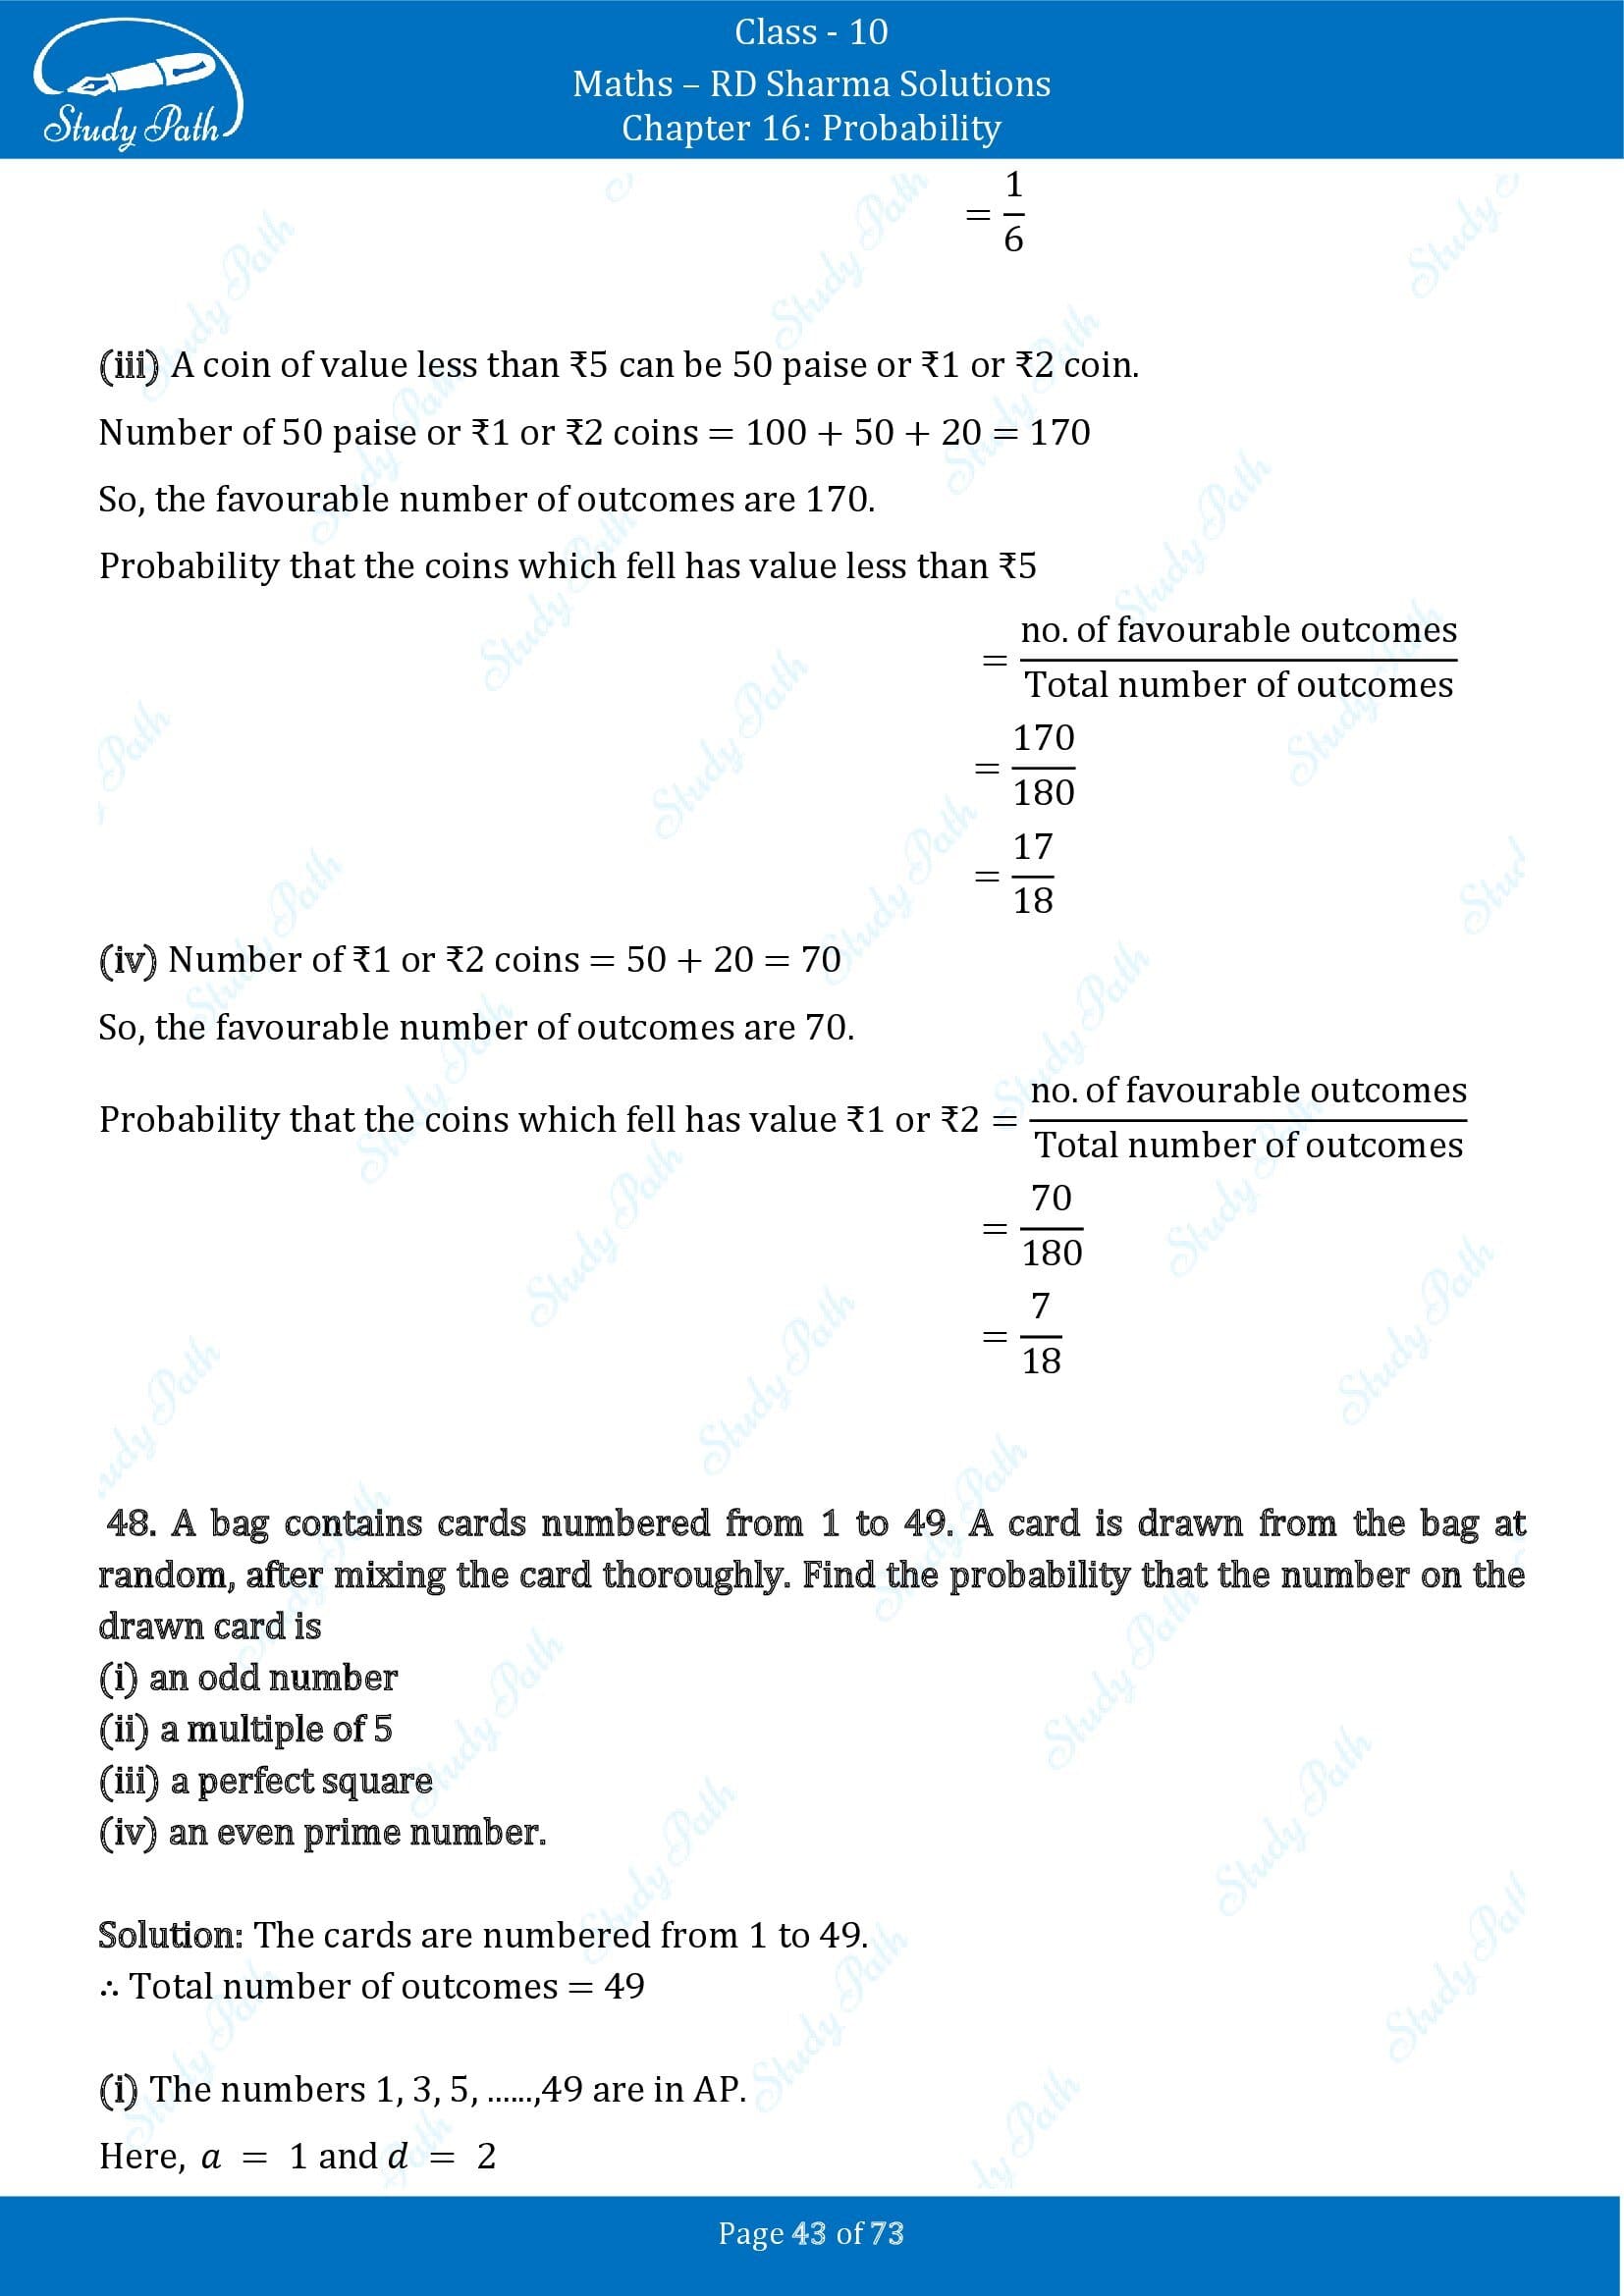 RD Sharma Solutions Class 10 Chapter 16 Probability Exercise 16.1 00043